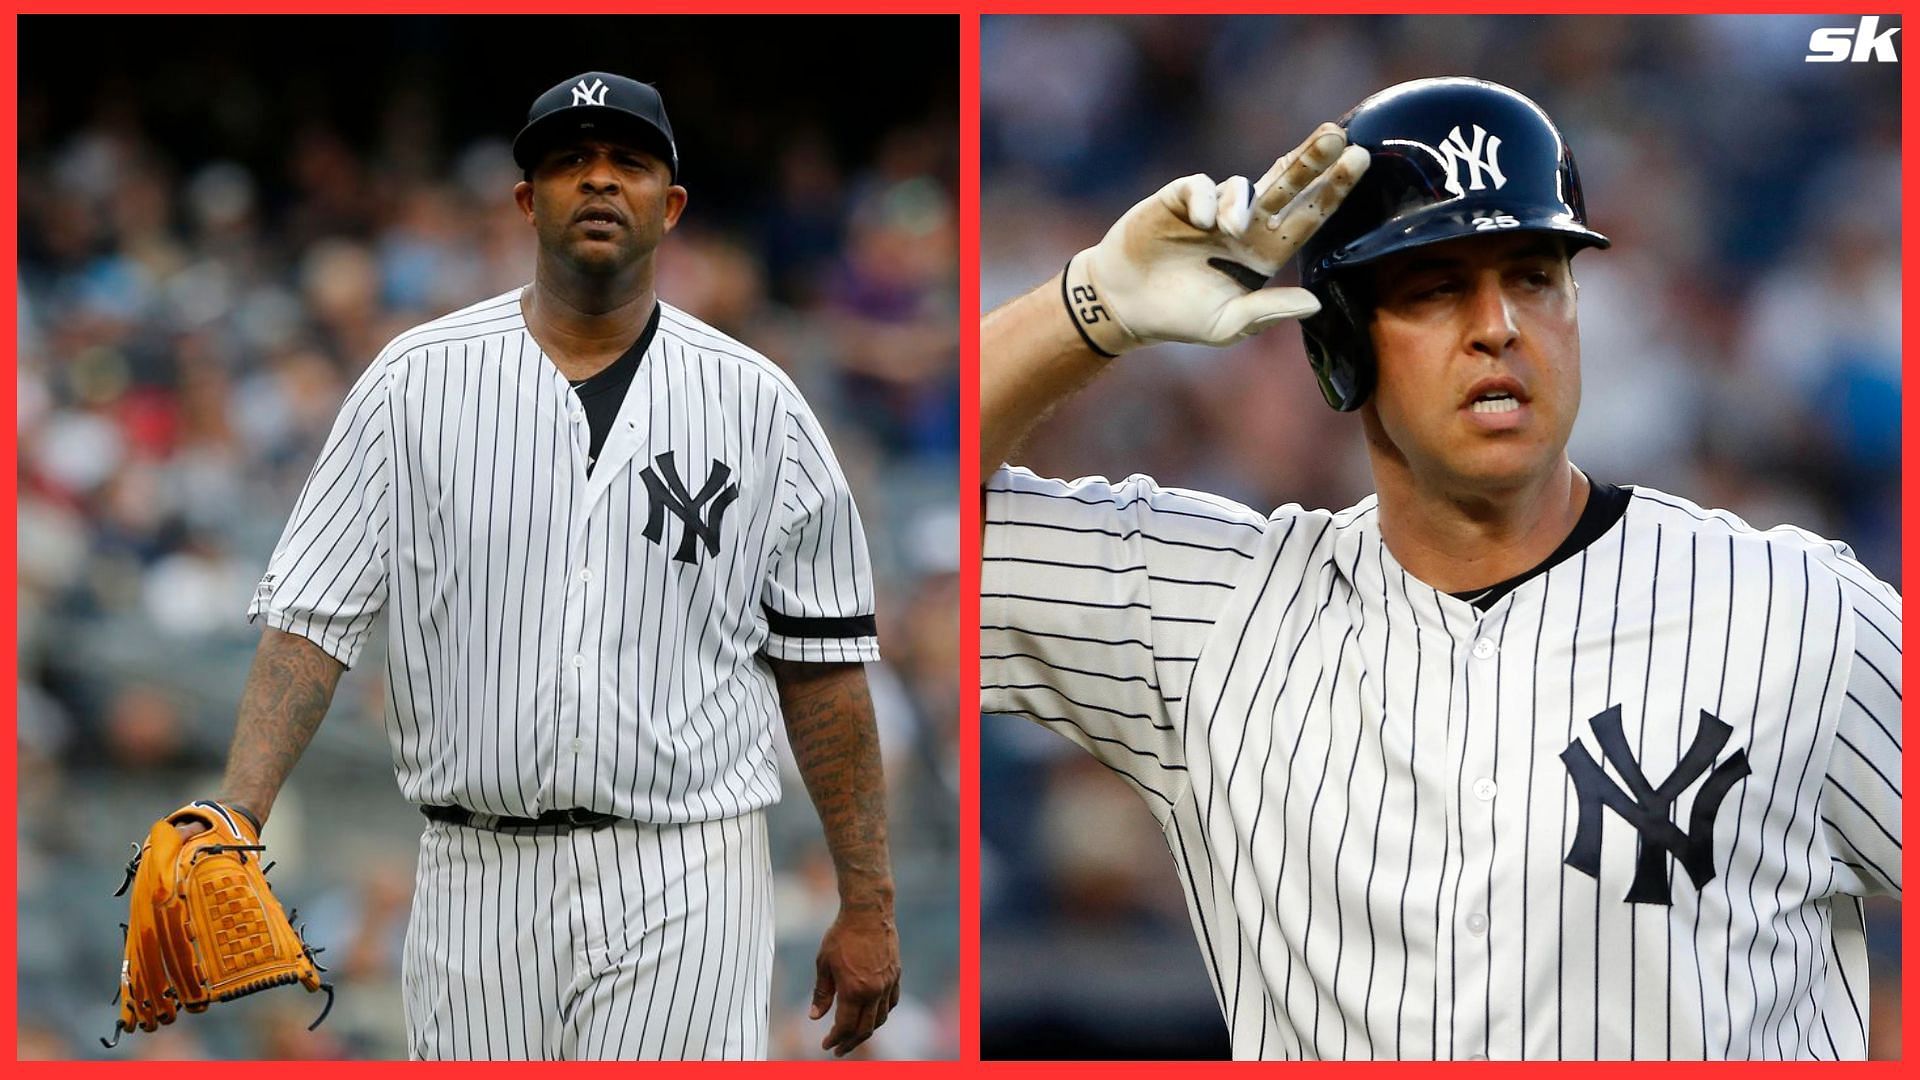 Sabathia hired as special assistant to Major League Baseball